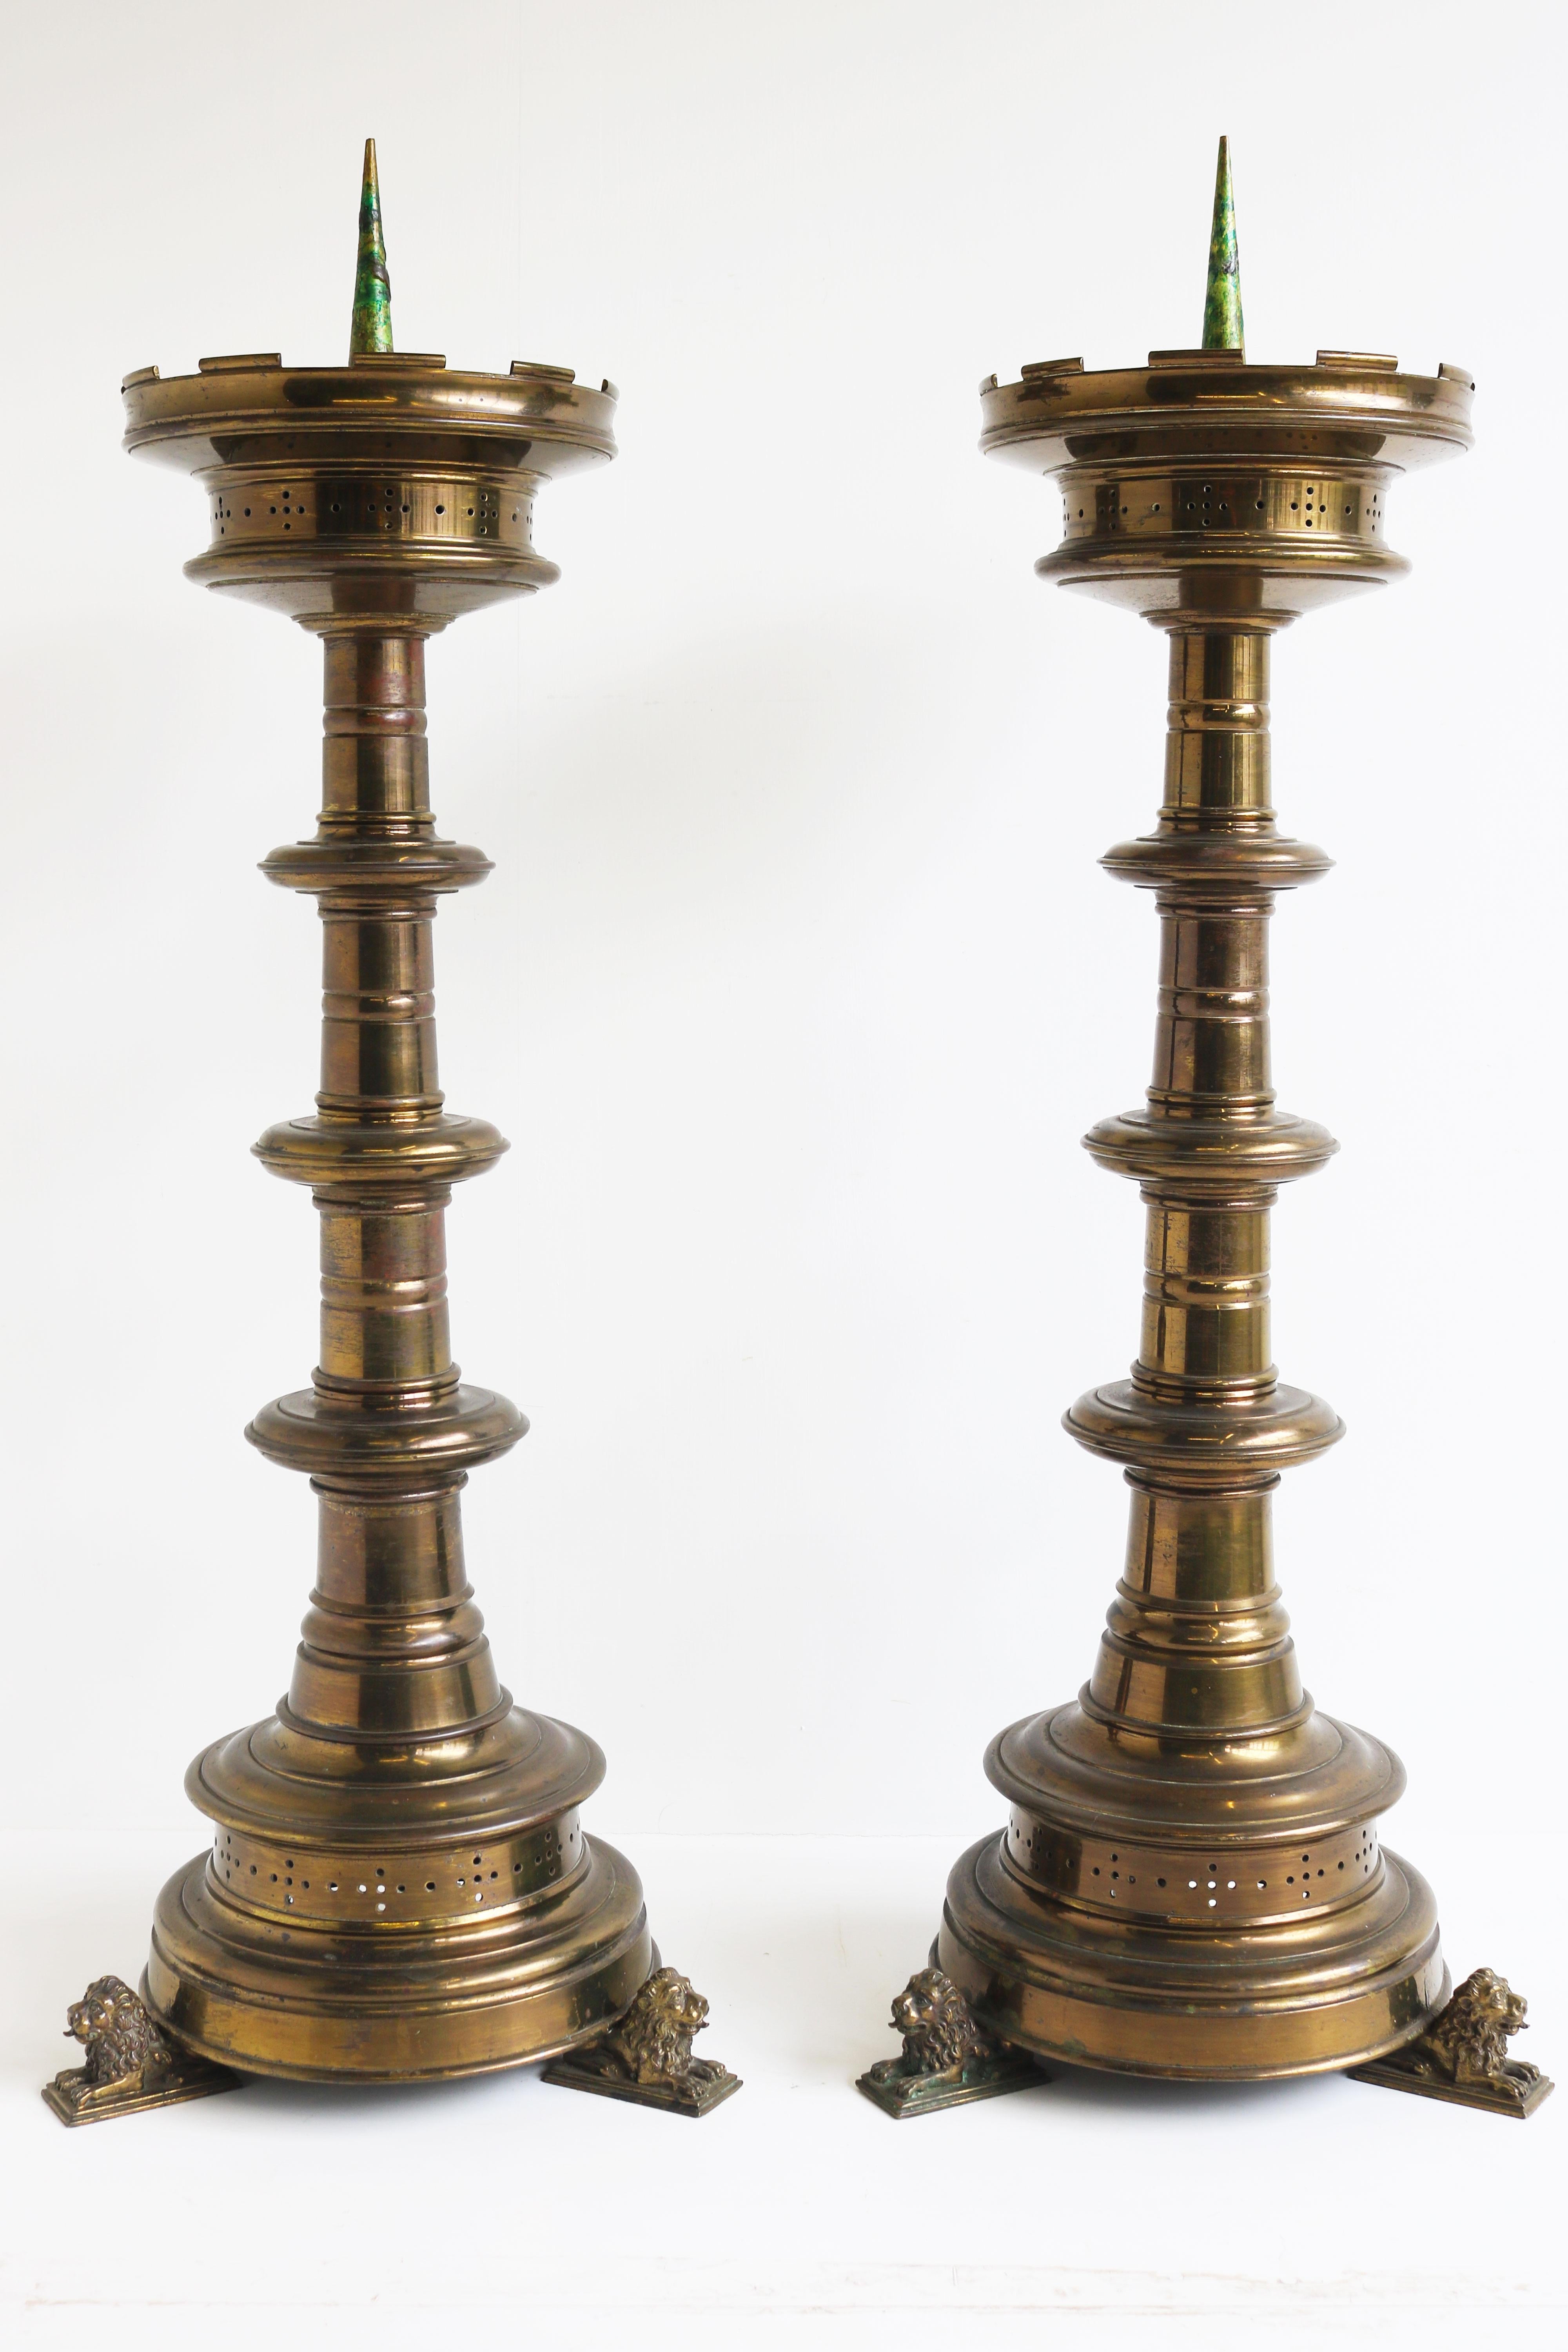 Pair of Large Gilt Bronze Gothic Revival Church Candlesticks Candleholders Lions For Sale 4